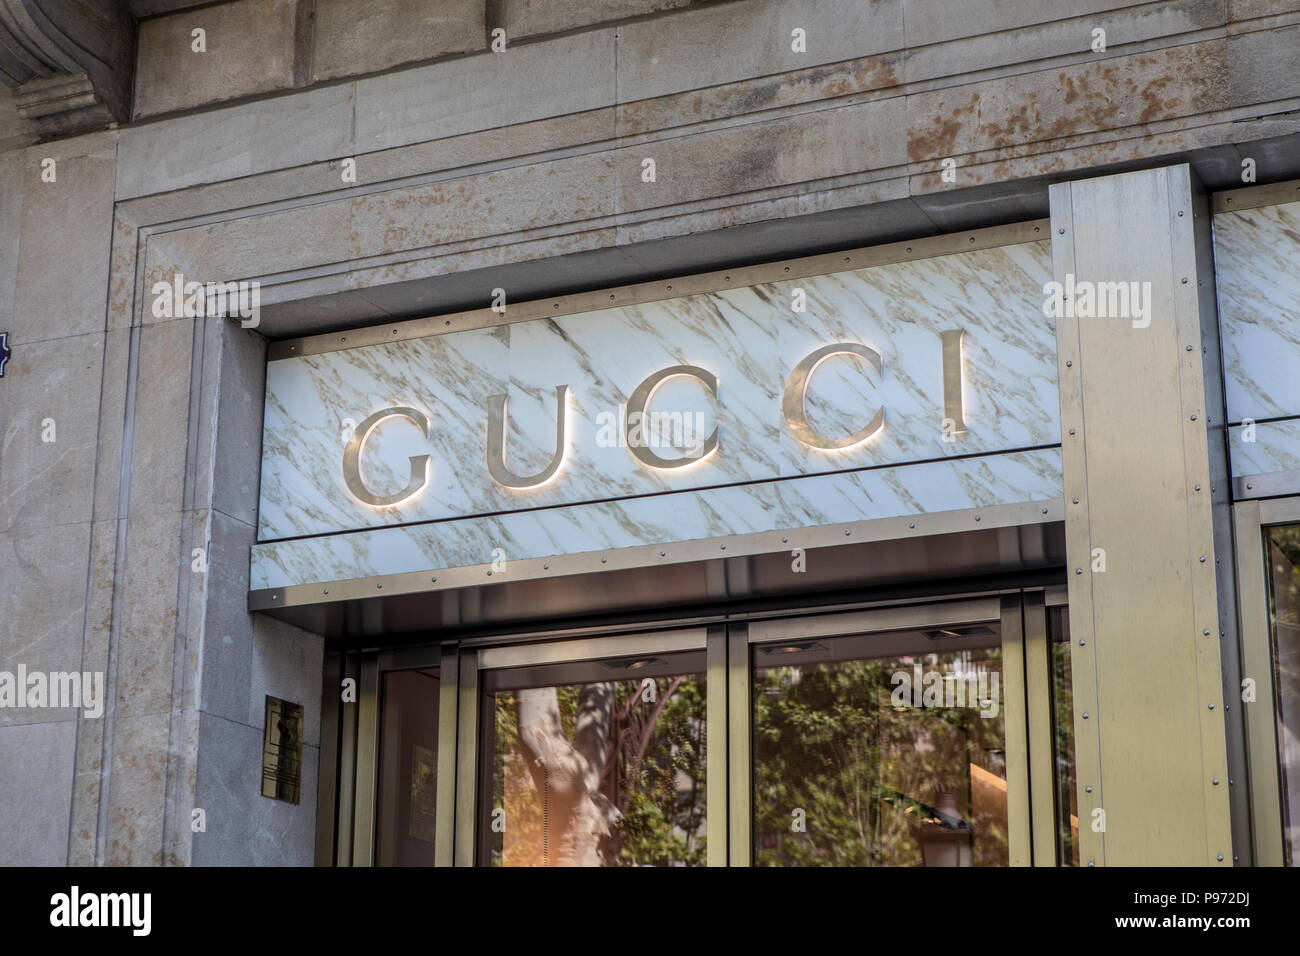 GUCCI sign on Passeig de Gràcia street in Barcelona. Barcelona is a city in  Spain. It is the capital and largest city of Catalonia, as well as the  second most populous municipality